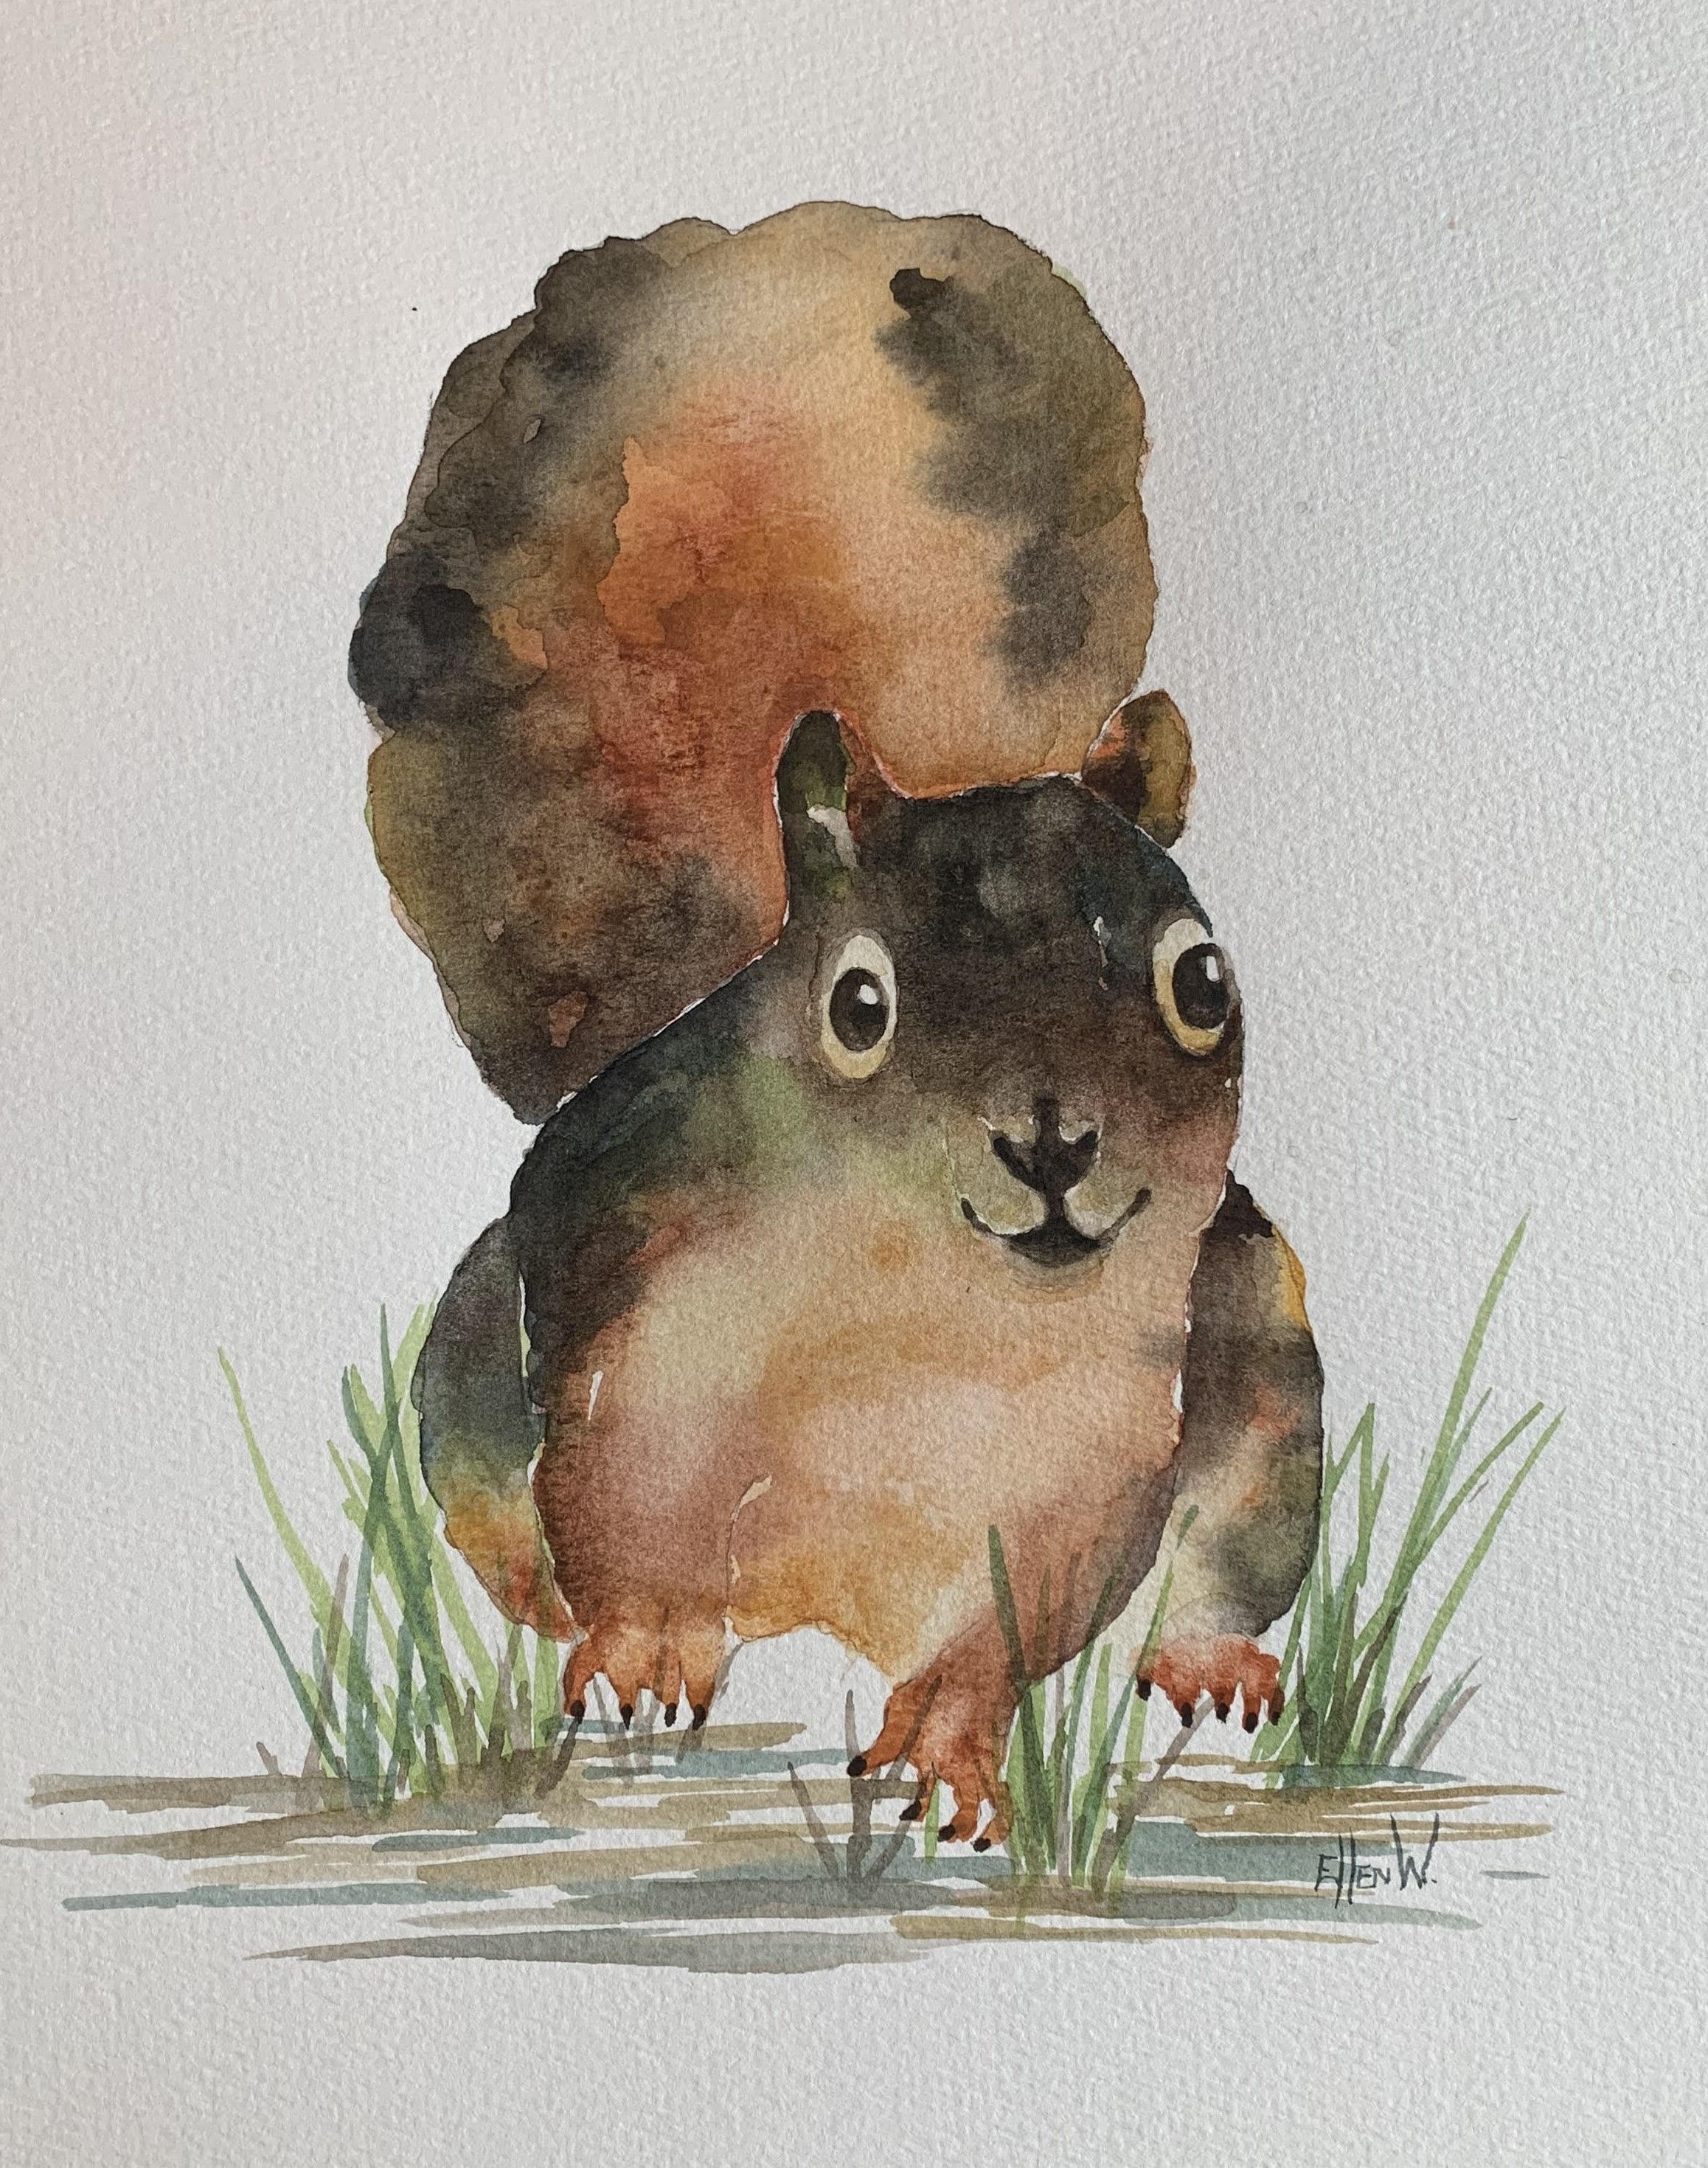 Soft water color painting of a squirrel facing you with its tail held upright. The squirrel has highlights on its chest and tail as it stands on the ground with green grass sprouts at its feet. 